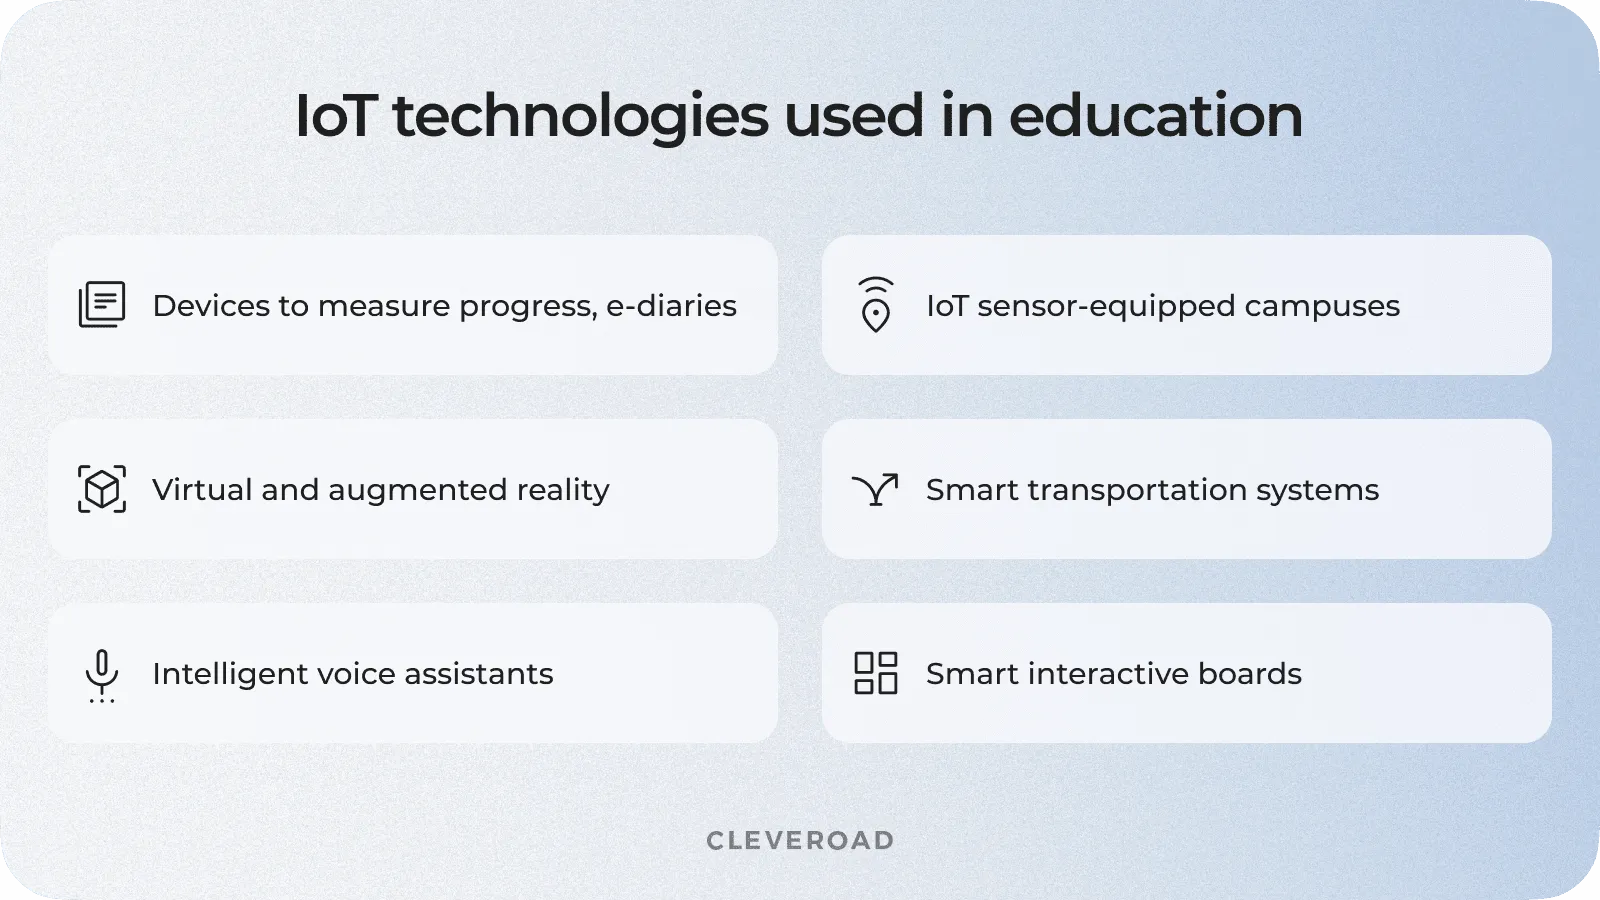 IoT for education